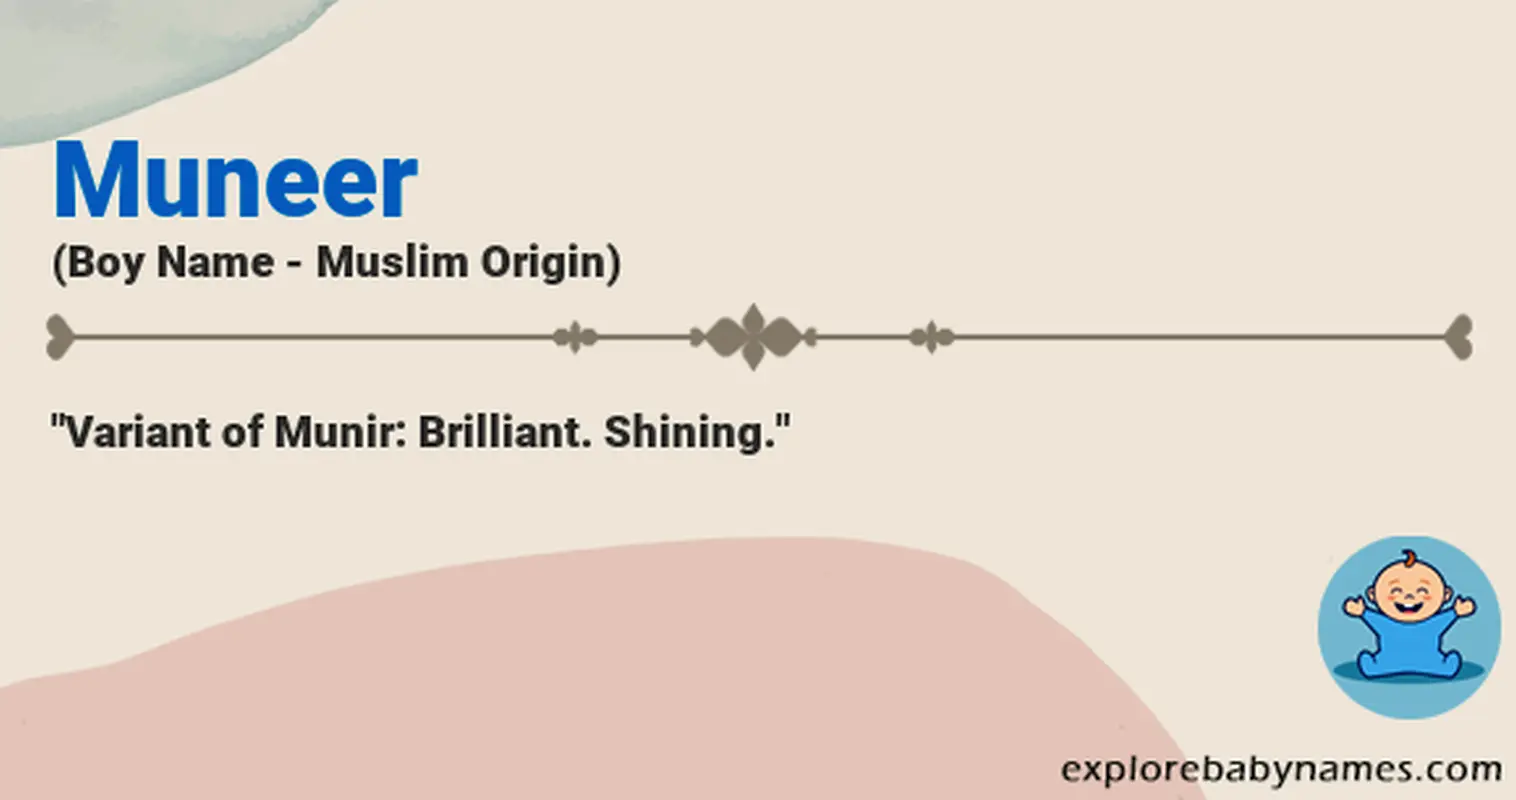 Meaning of Muneer